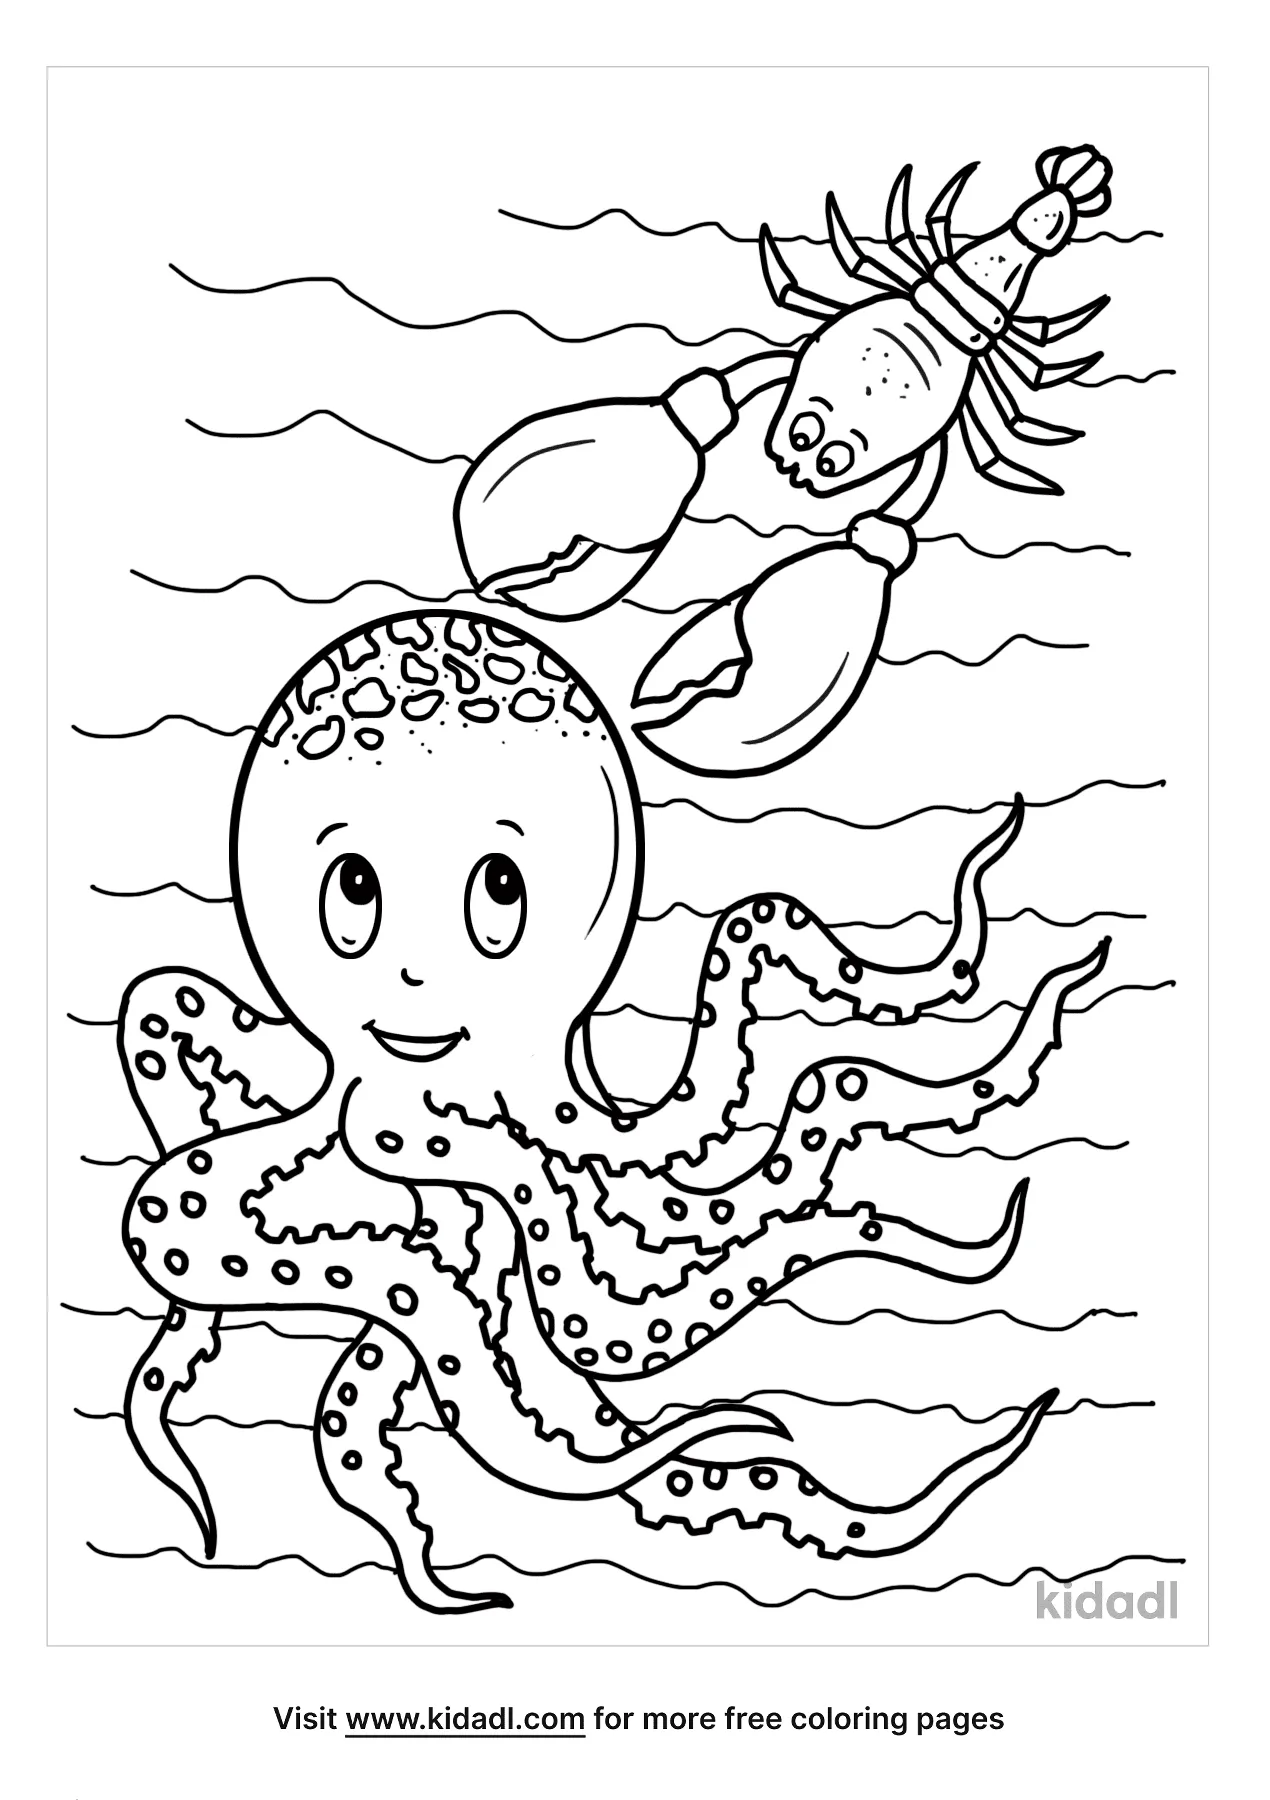 Coloring Pages Water Animals - Ocean Animals Coloring Pages - Sea